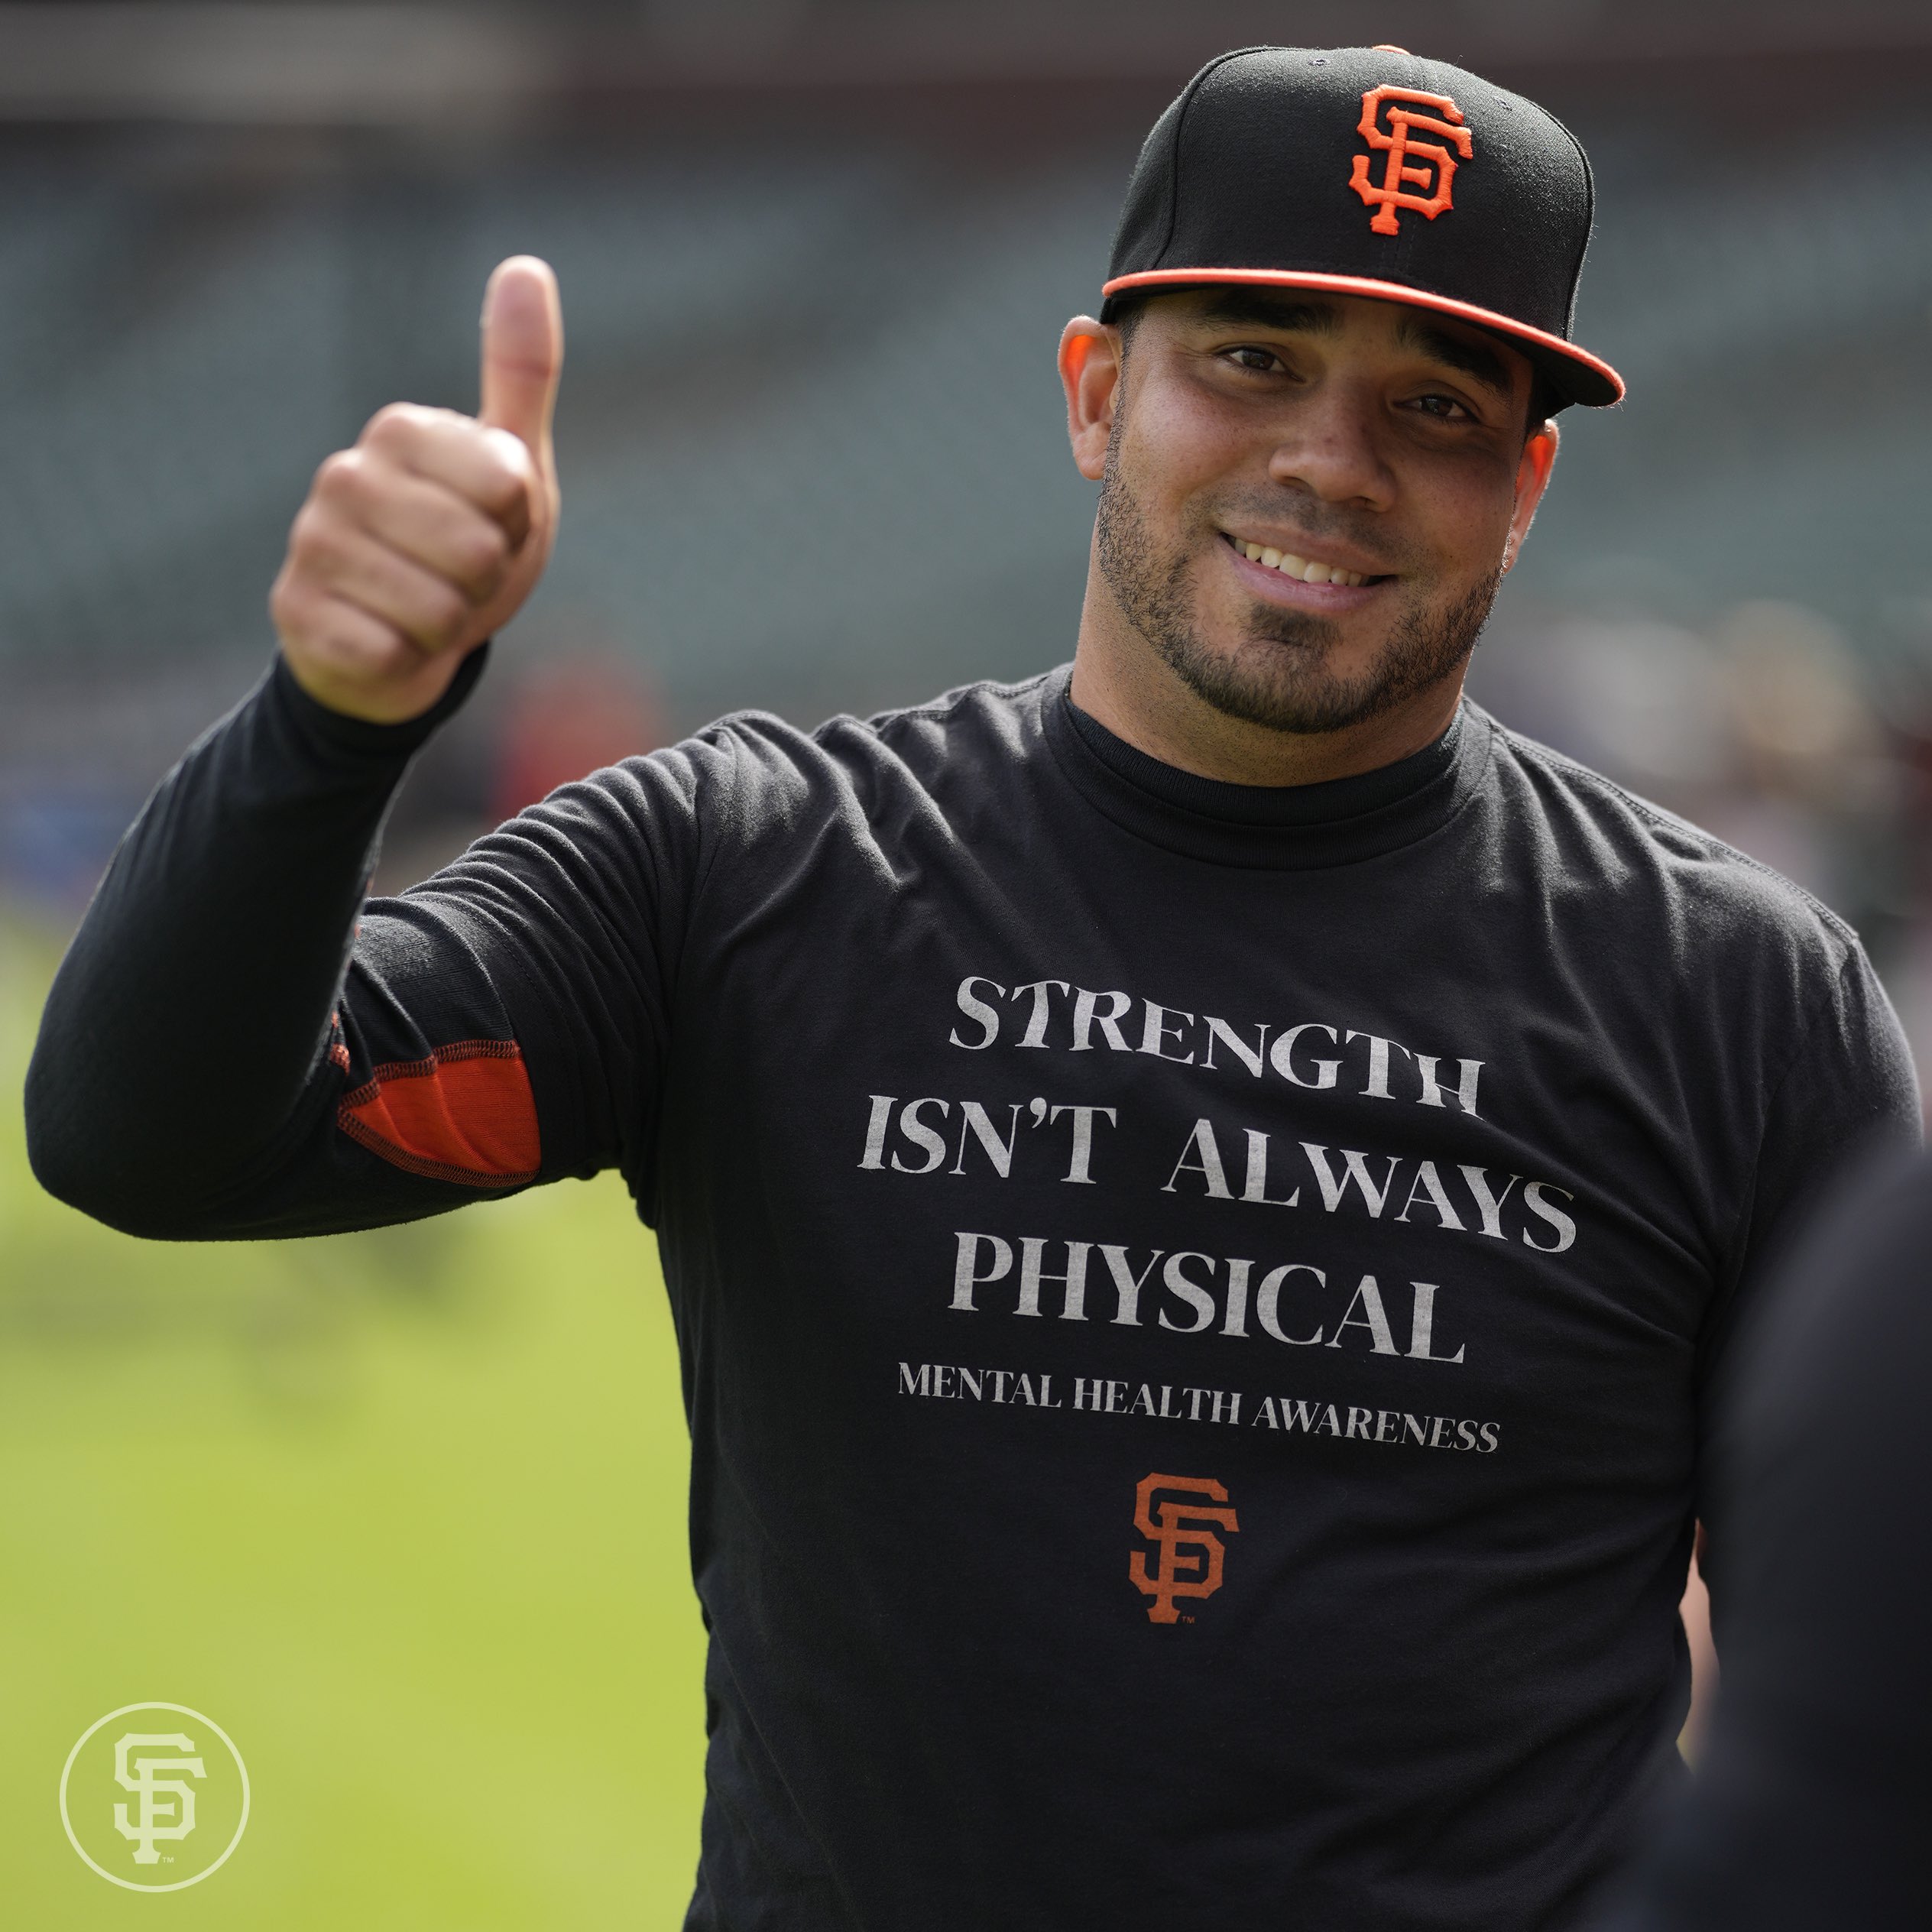 SFGiants on X: Today, the #SFGiants held their annual Mental Health  Awareness Day. The month of May is Mental Health Awareness month, and the San  Francisco Giants continue to have conversations surrounding